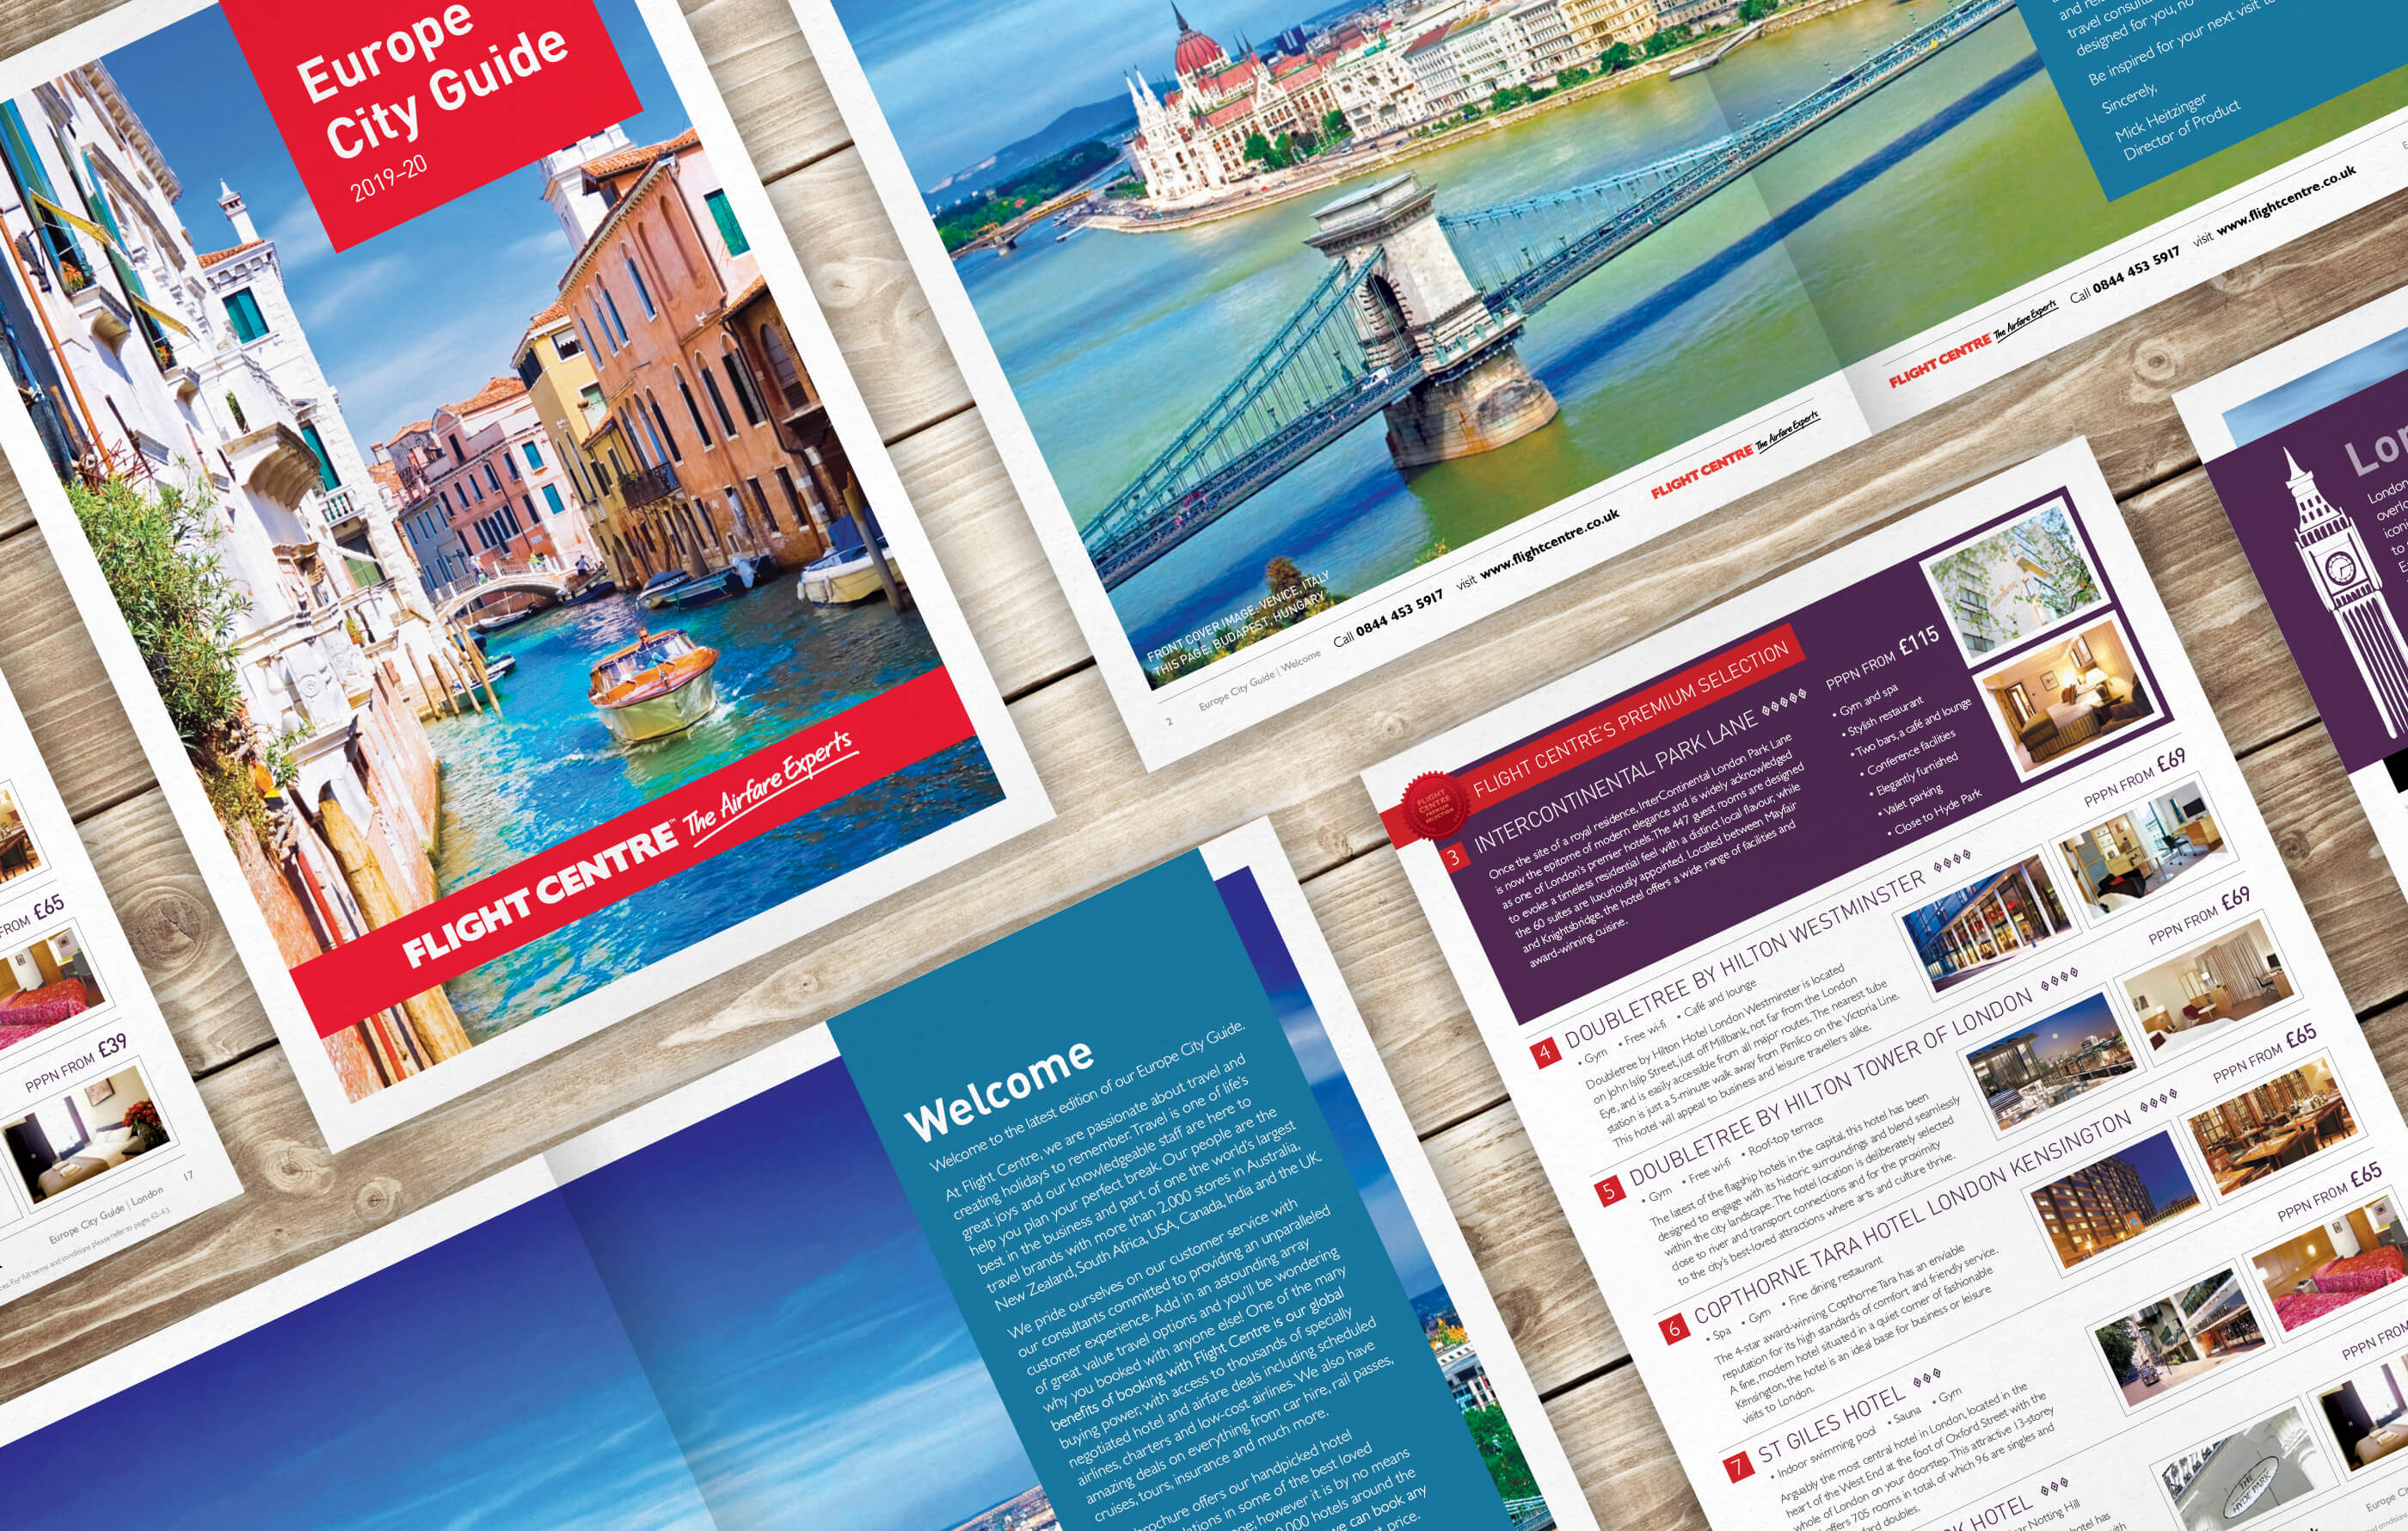 Various brochure page designs laid out in a grid on an angle, including front cover, welcome intro spread and London section